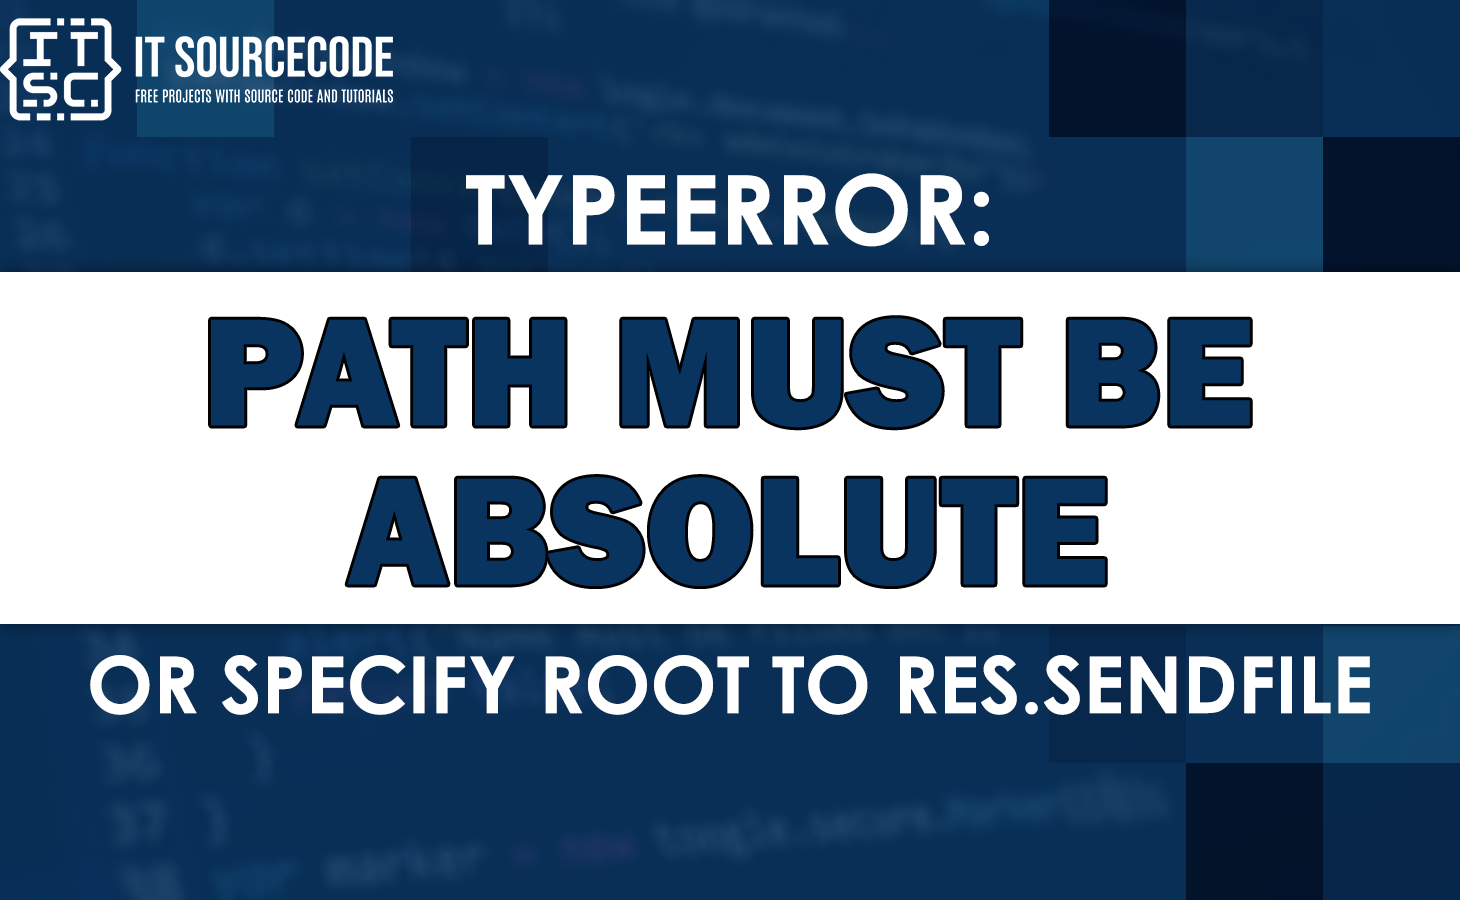 Typeerror: path must be absolute or specify root to res.sendfile